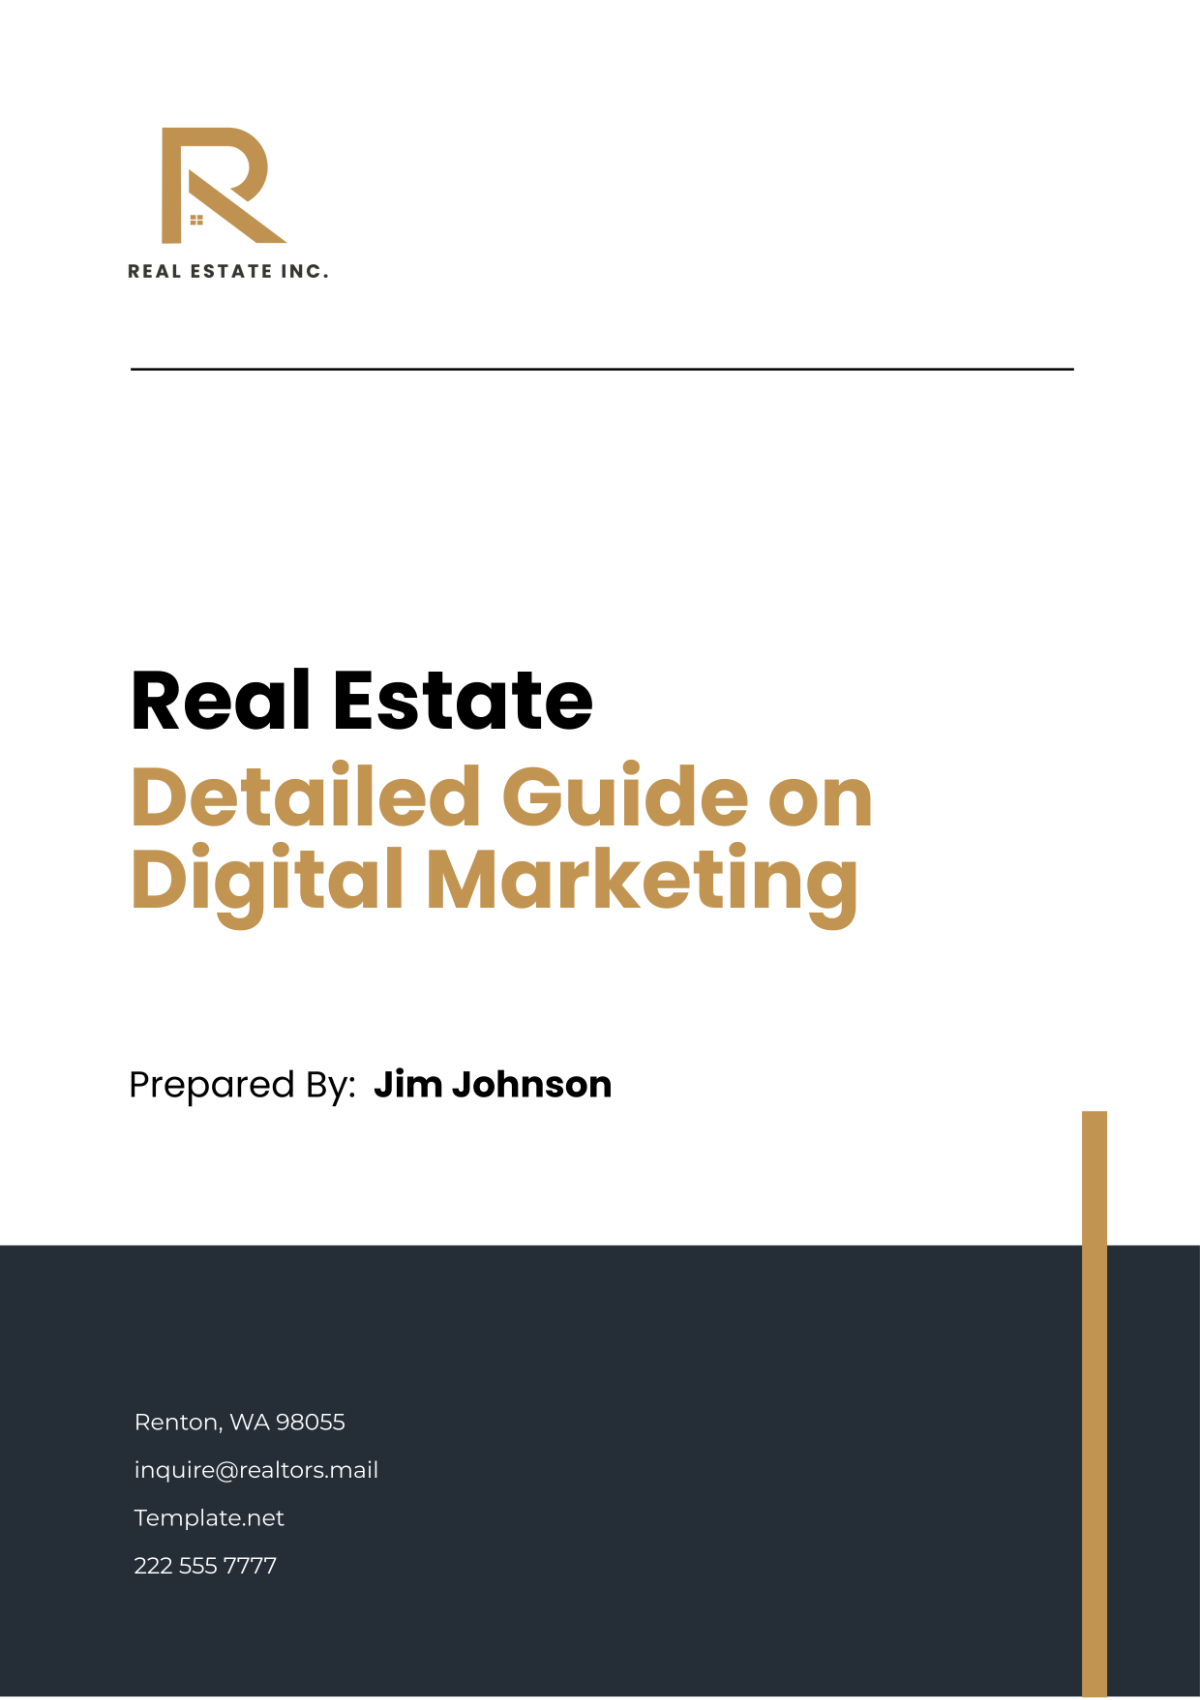 Real Estate Detailed Guide on Digital Marketing Template